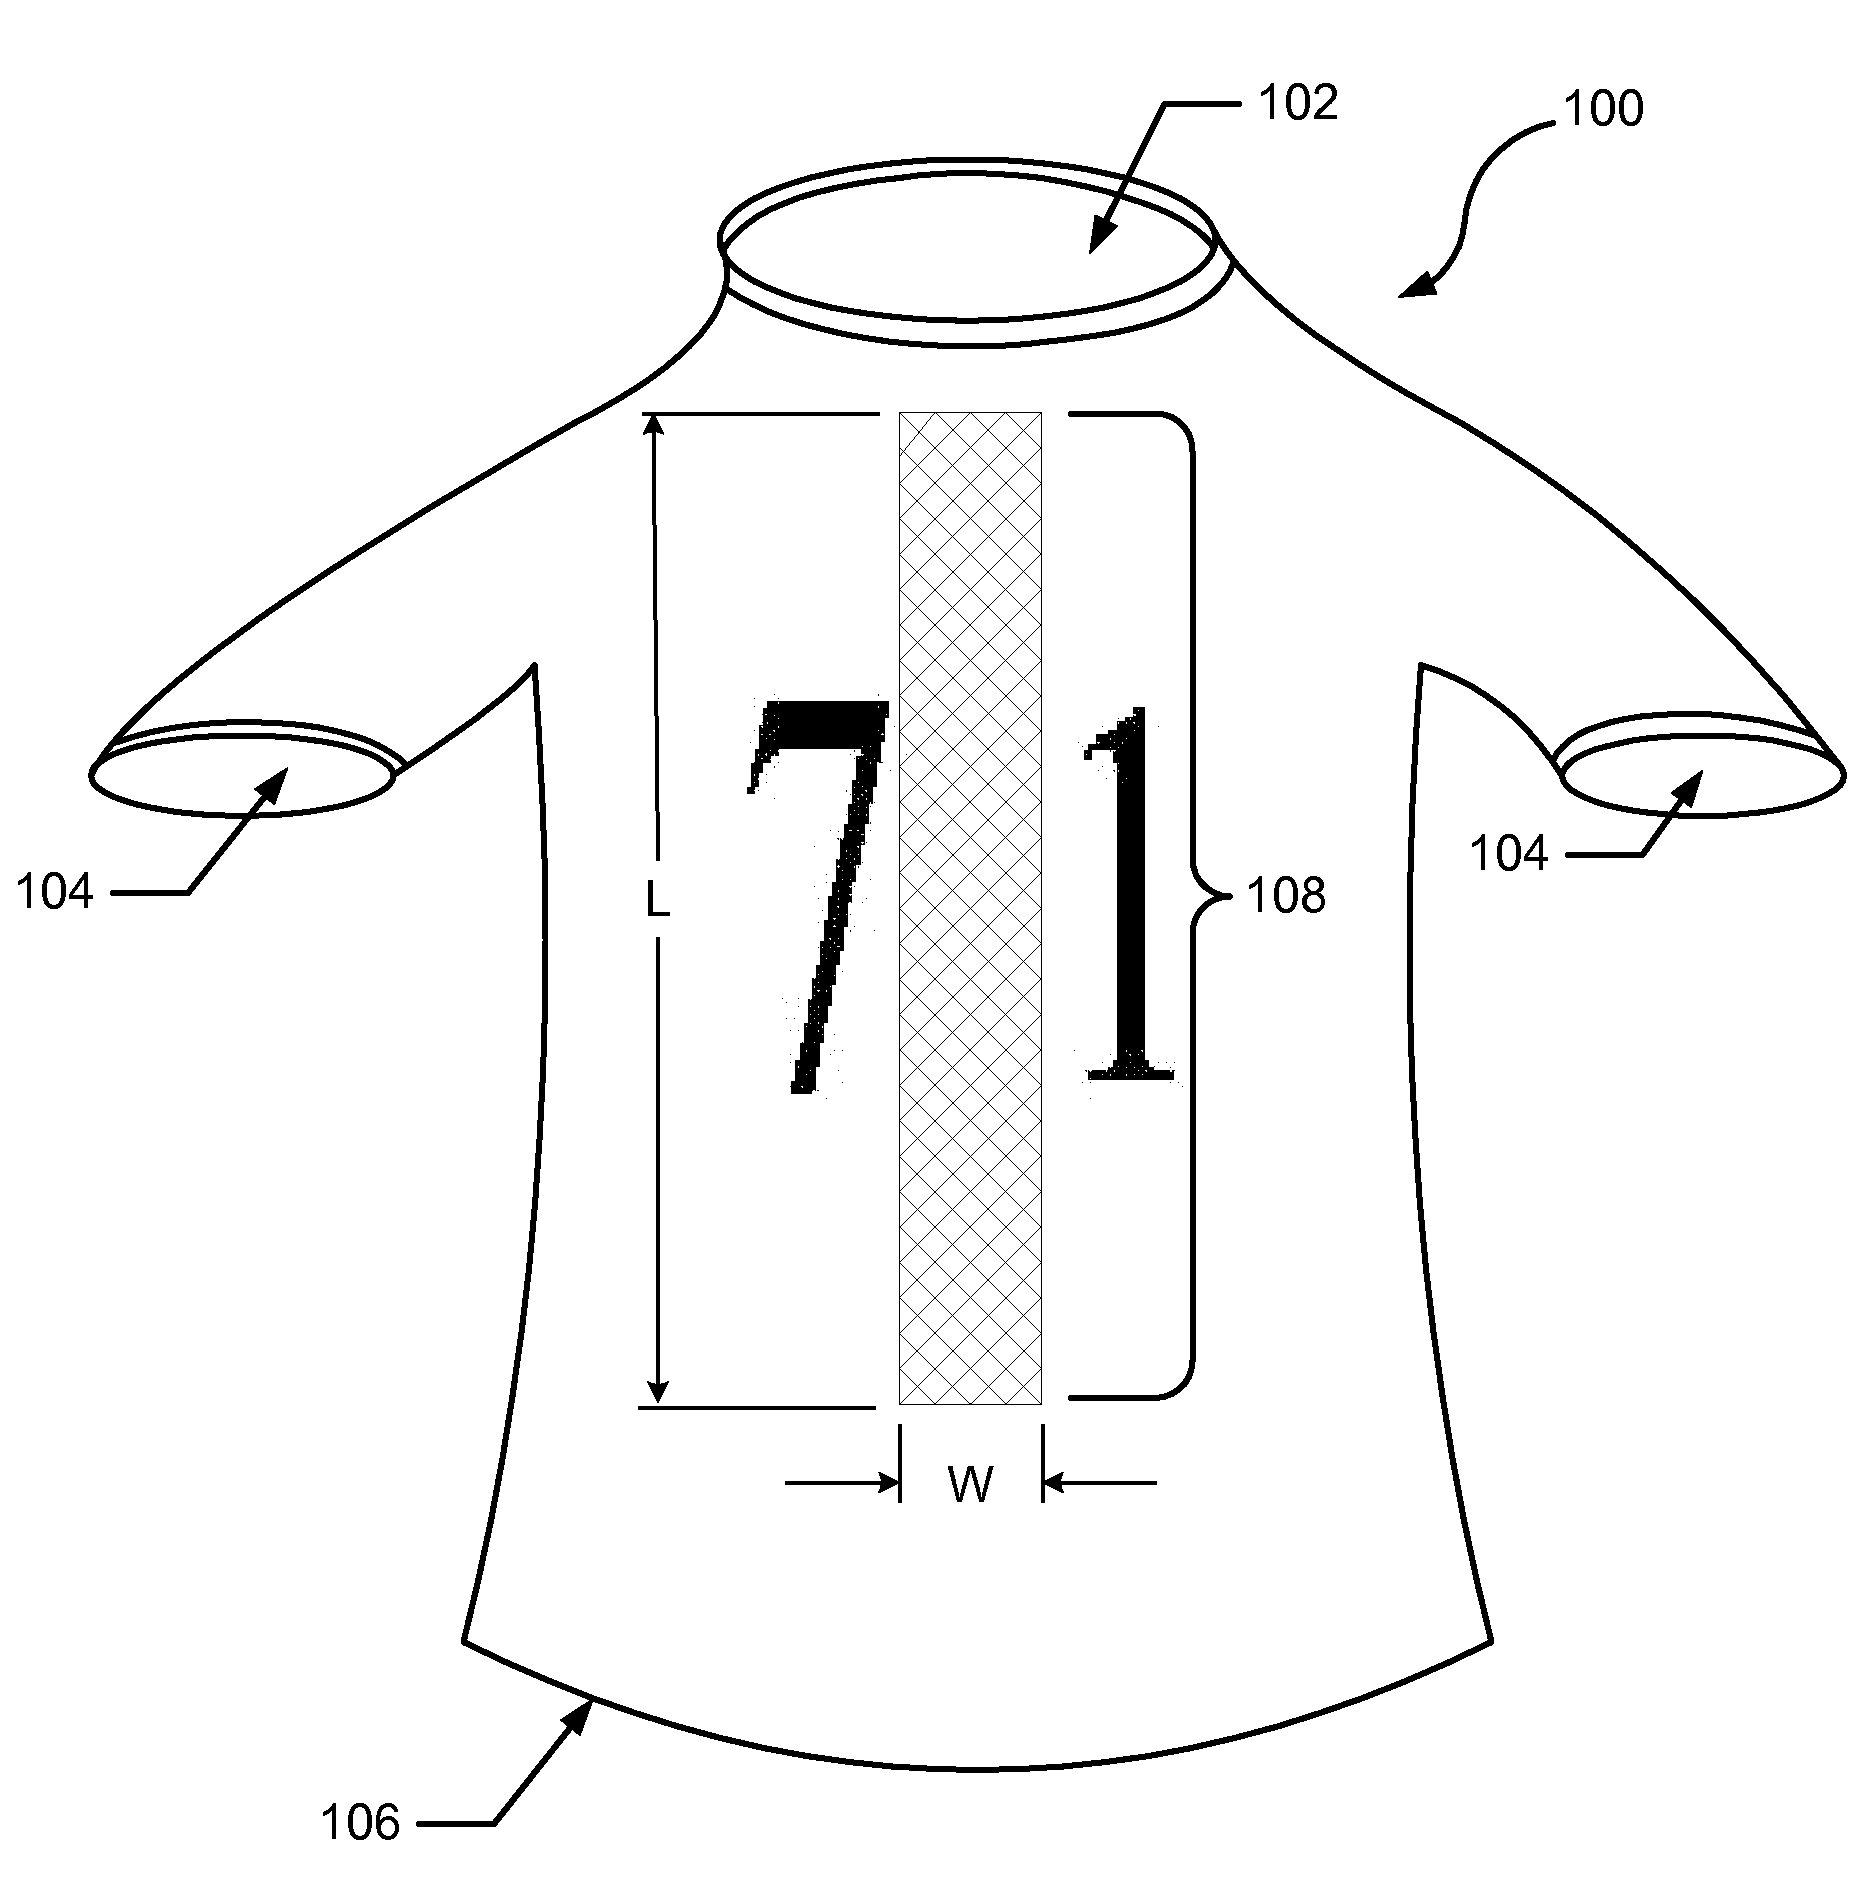 Article Of Apparel Incorporating A Zoned Modifiable Textile Structure